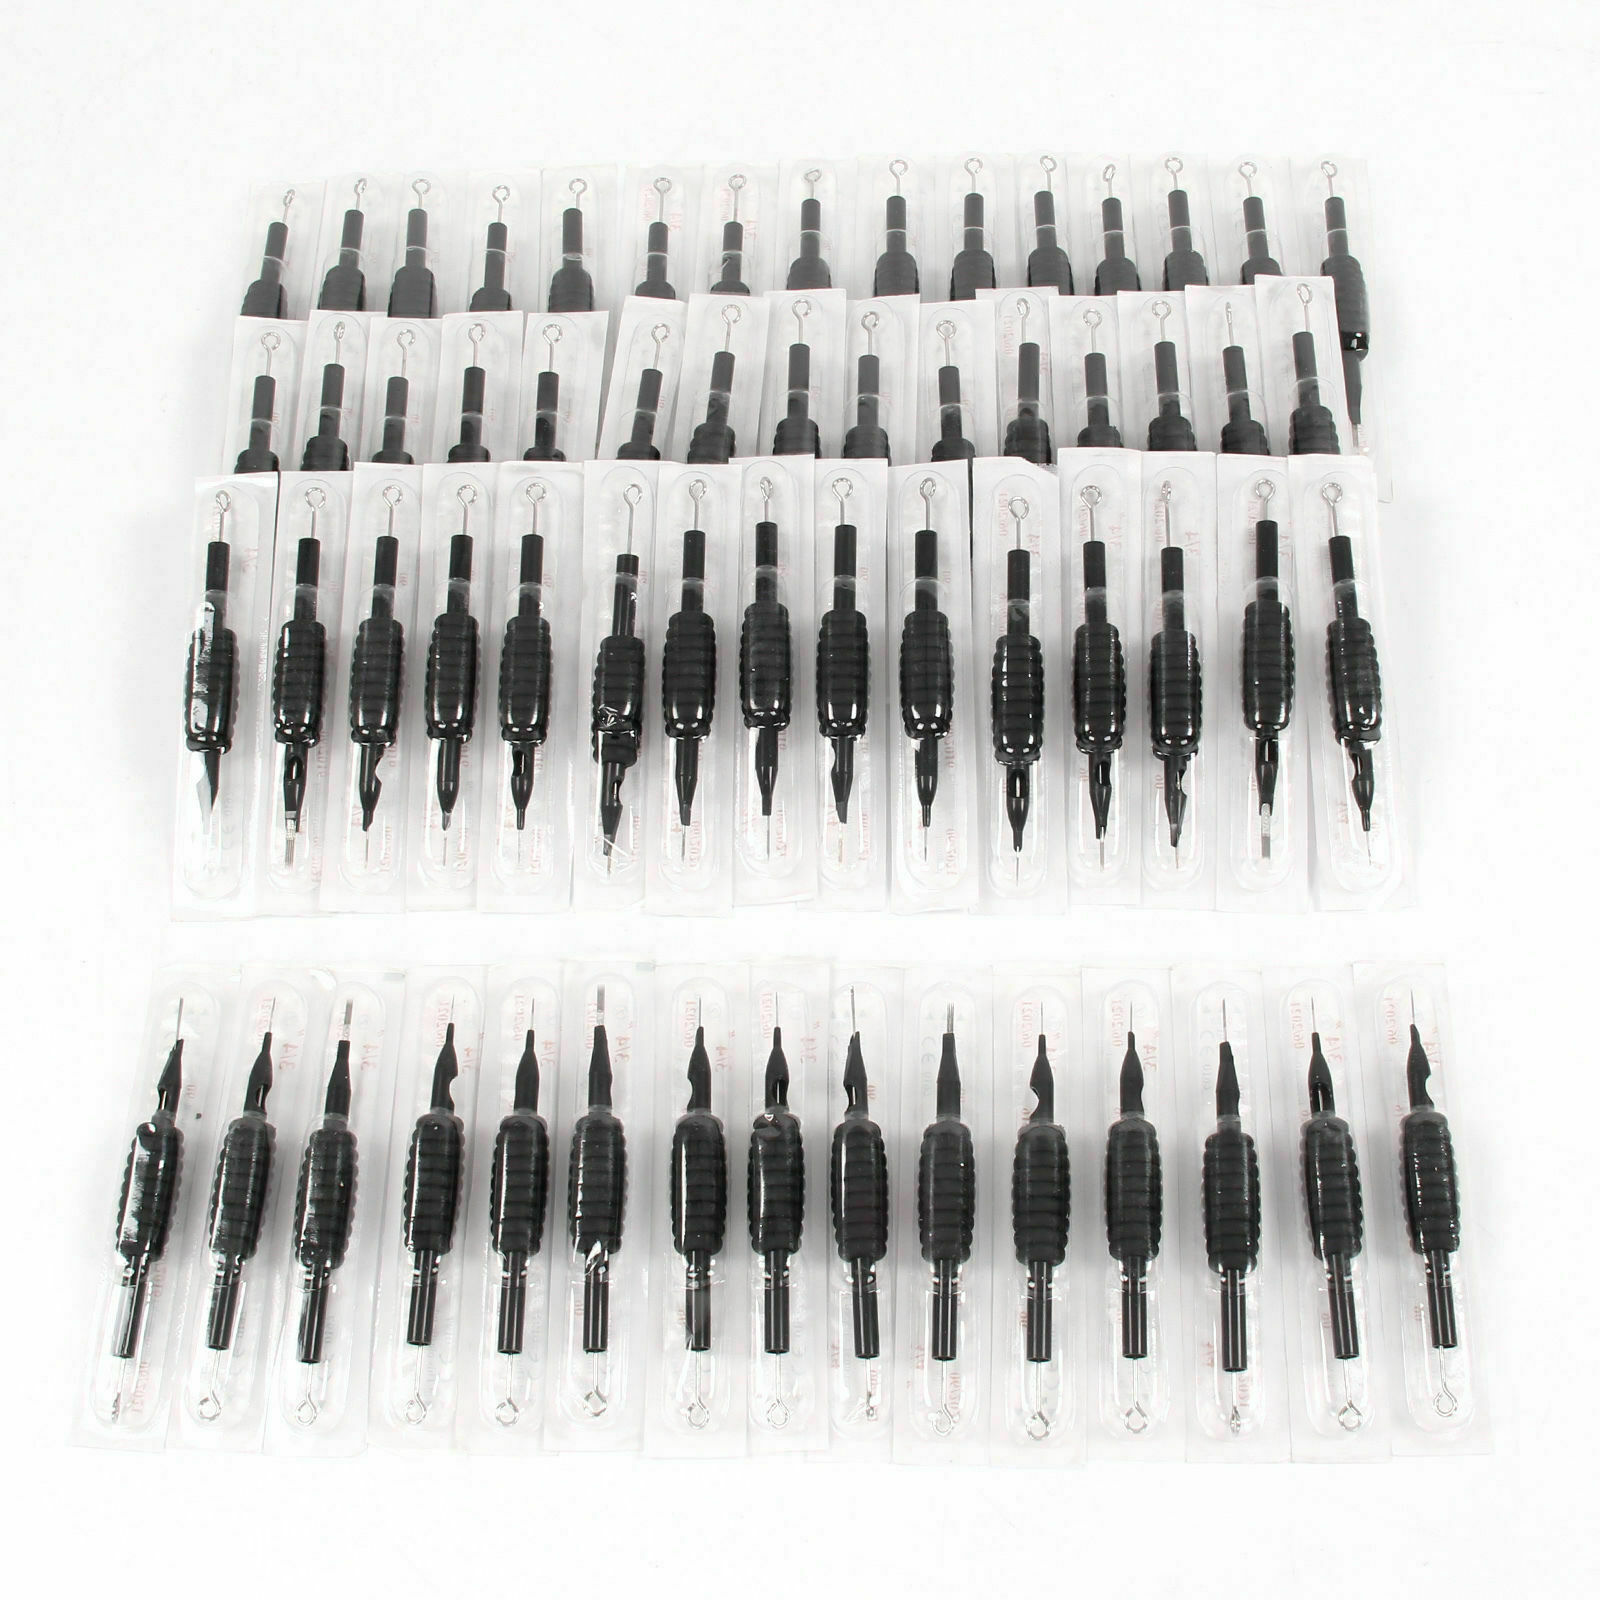 60*Disposable Tattoo Sterilized Needles Mixed Assorted with Tube 3/4 Grip Tip Unbranded Does not apply - фотография #4